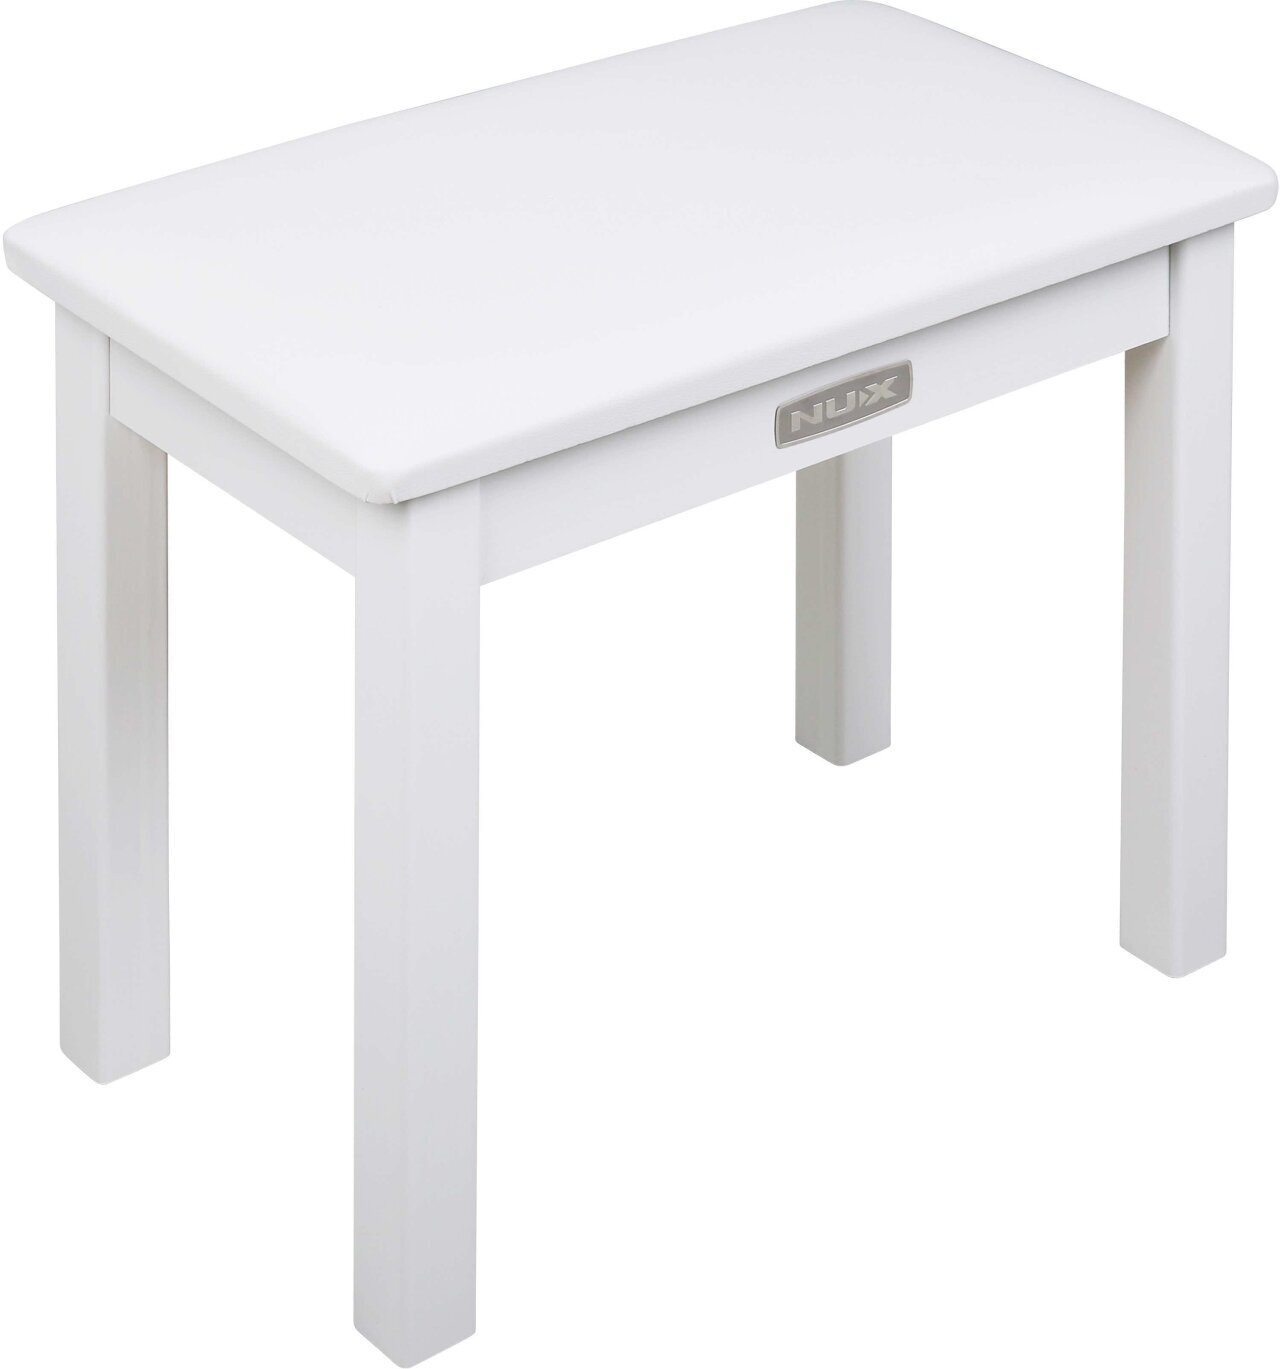 Wooden or classic piano stools
 Nux NBP1 White